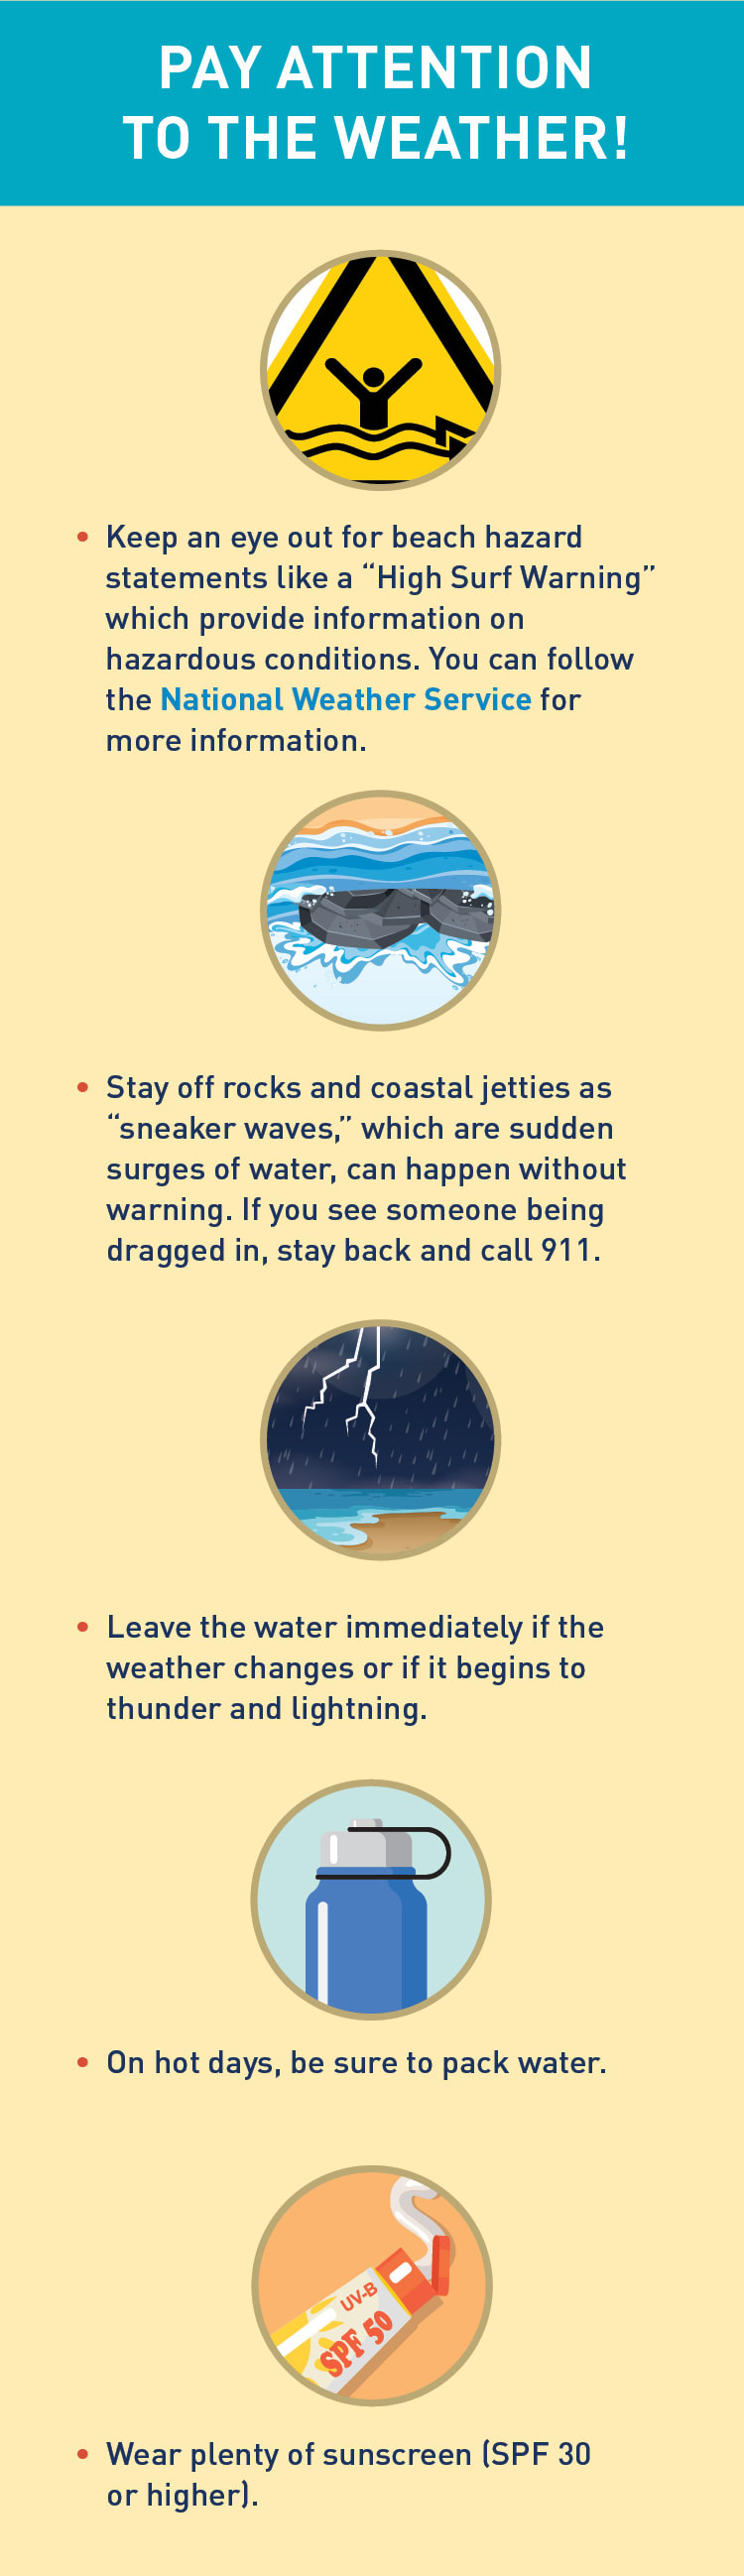 Graphics of a "High Surf Warning" sign, coastal jetties, lightning at a beach, a water bottle, and sunscreen.